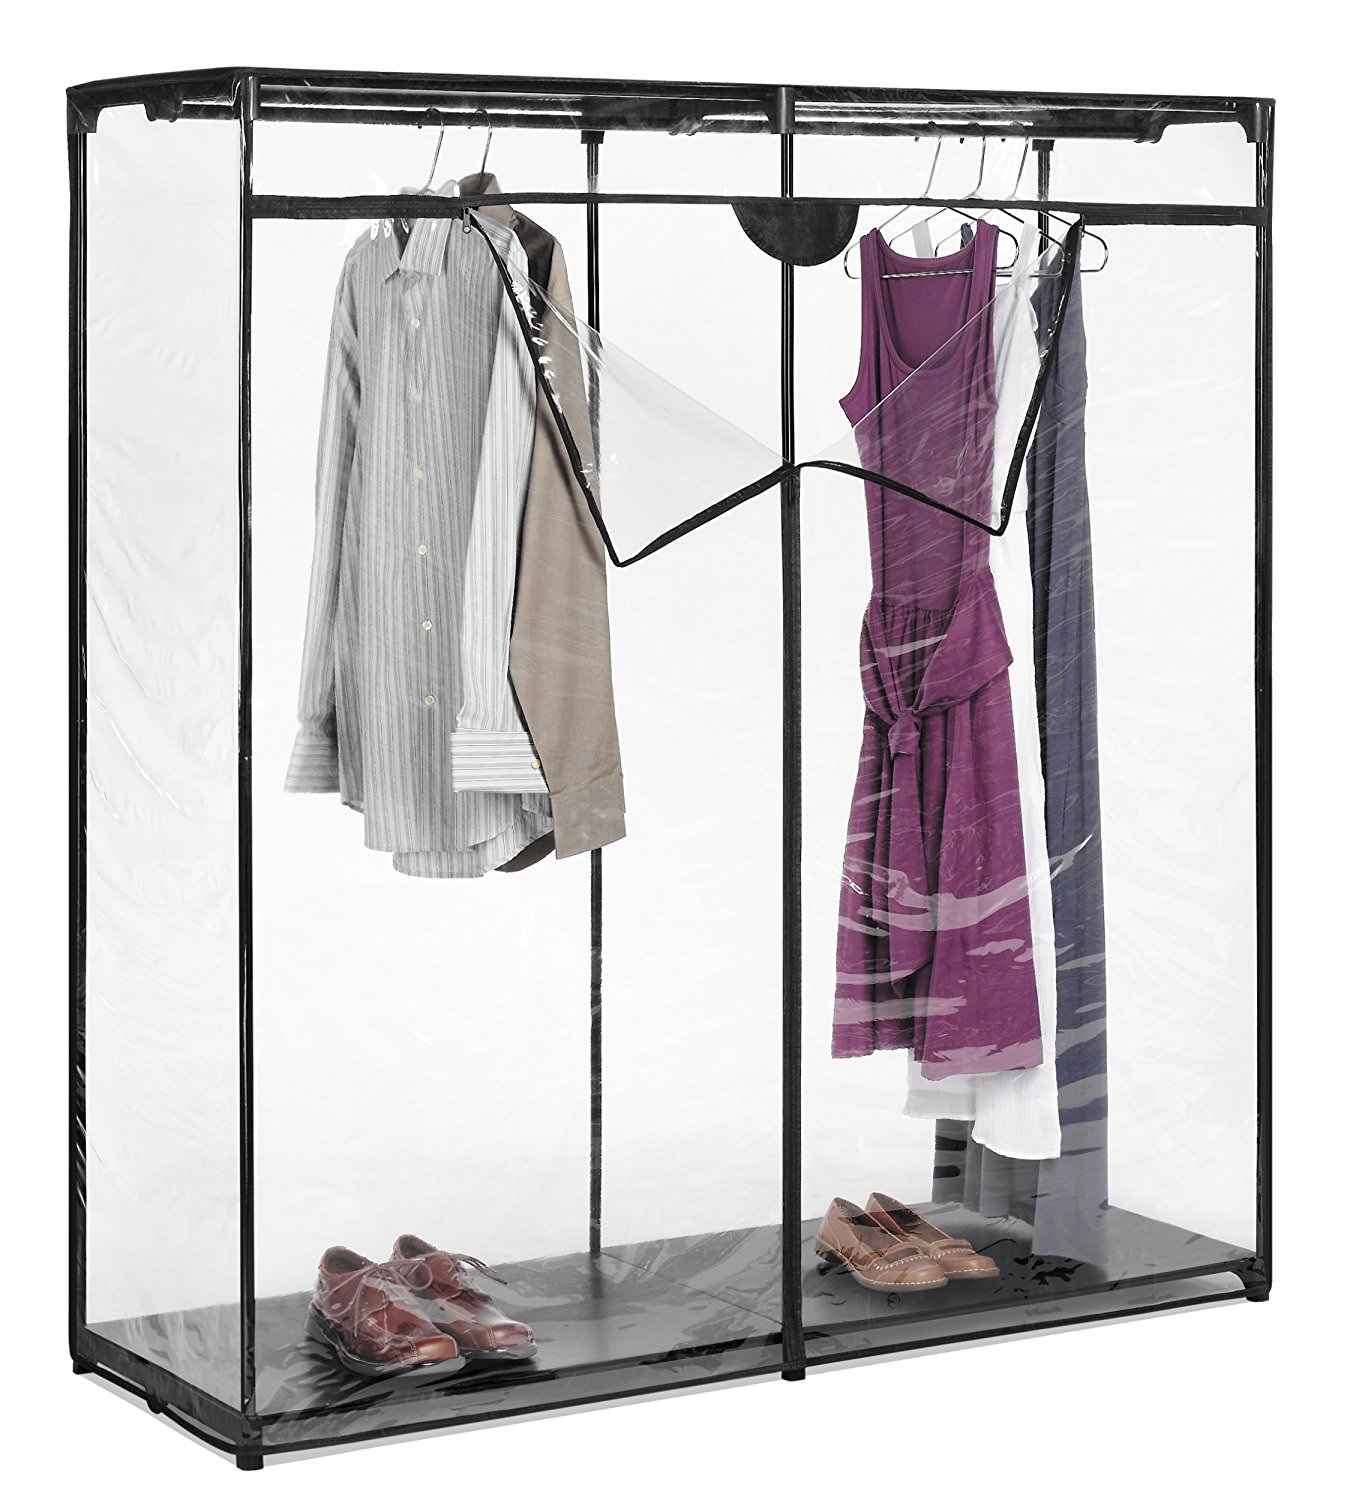 Whitmor Extra Wide 60 inch Metal Freestanding Closet Systems, Black and Clear - image 3 of 5